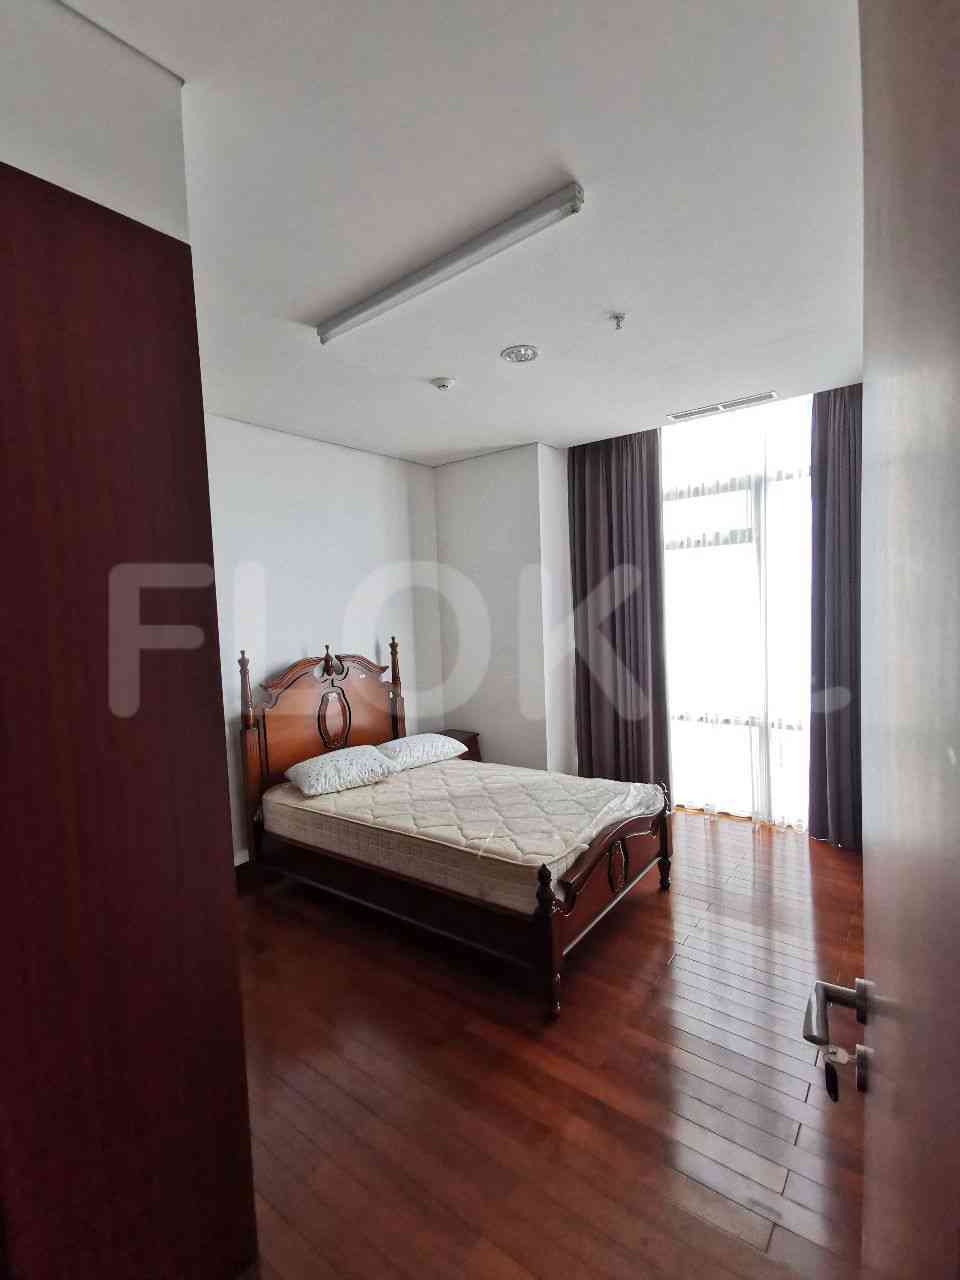 4 Bedroom on 7th Floor for Rent in Essence Darmawangsa Apartment - fci672 3